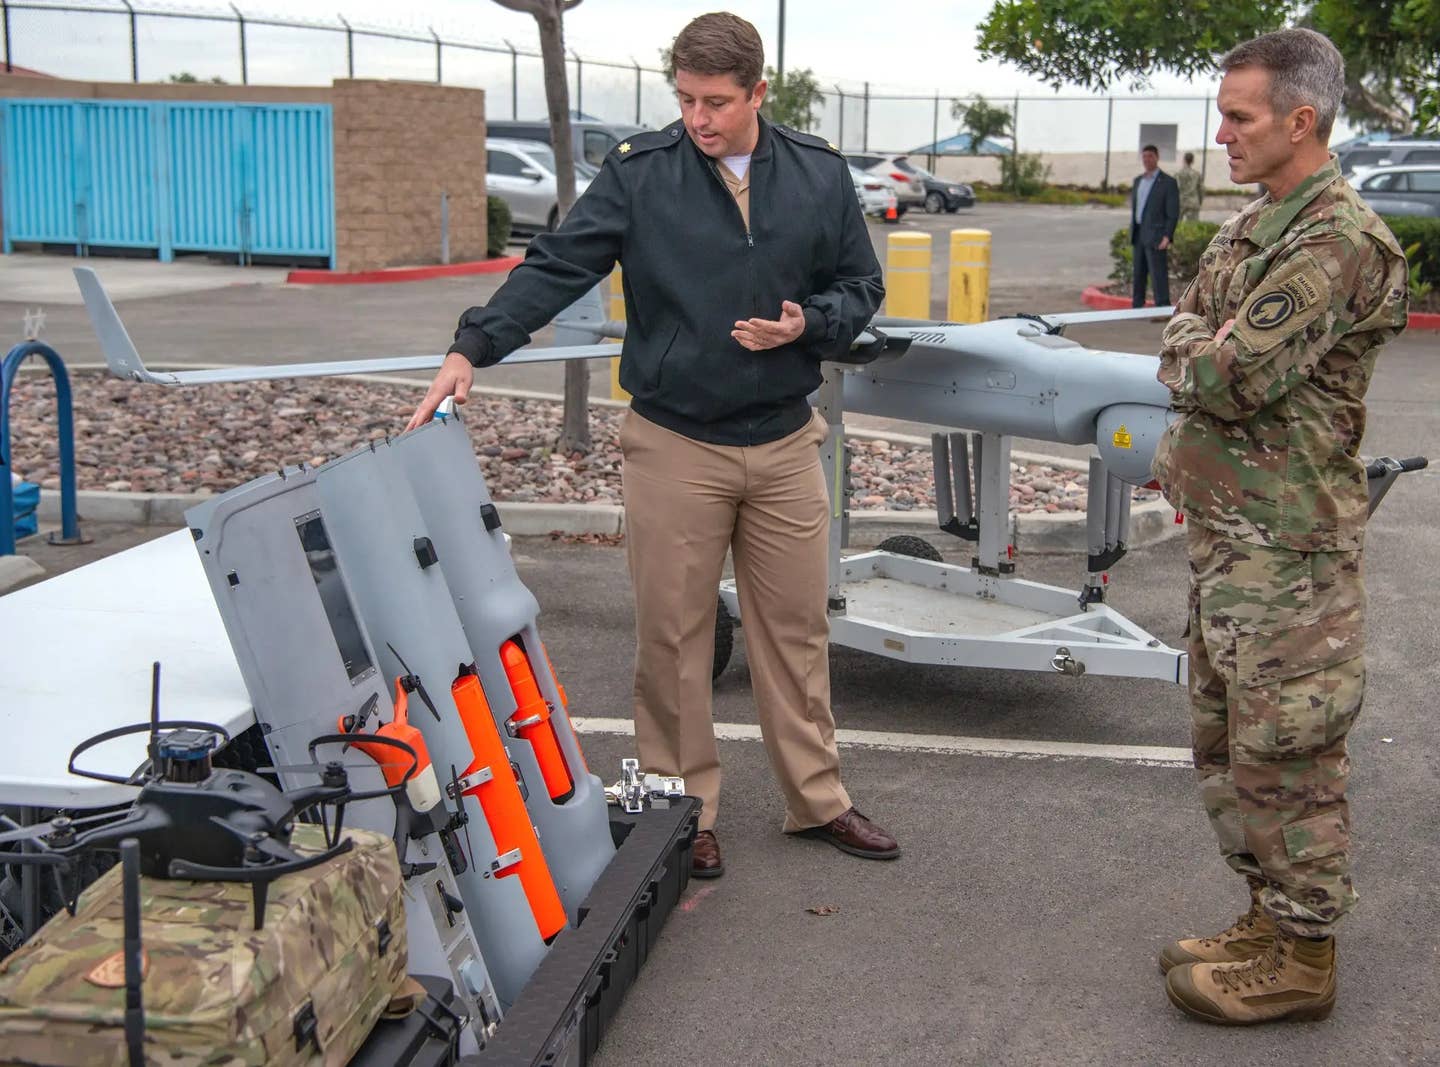 An individual assigned to Naval Special Warfare Command, at left, shows payload modules for the RQ-21 Blackjack, including one holding a small quadcopter-type drone, to U.S. Army Gen. Richard Clarke, commander of U.S. Special Operations Command, December 13, 2021.&nbsp;<em>U.S. Navy</em>